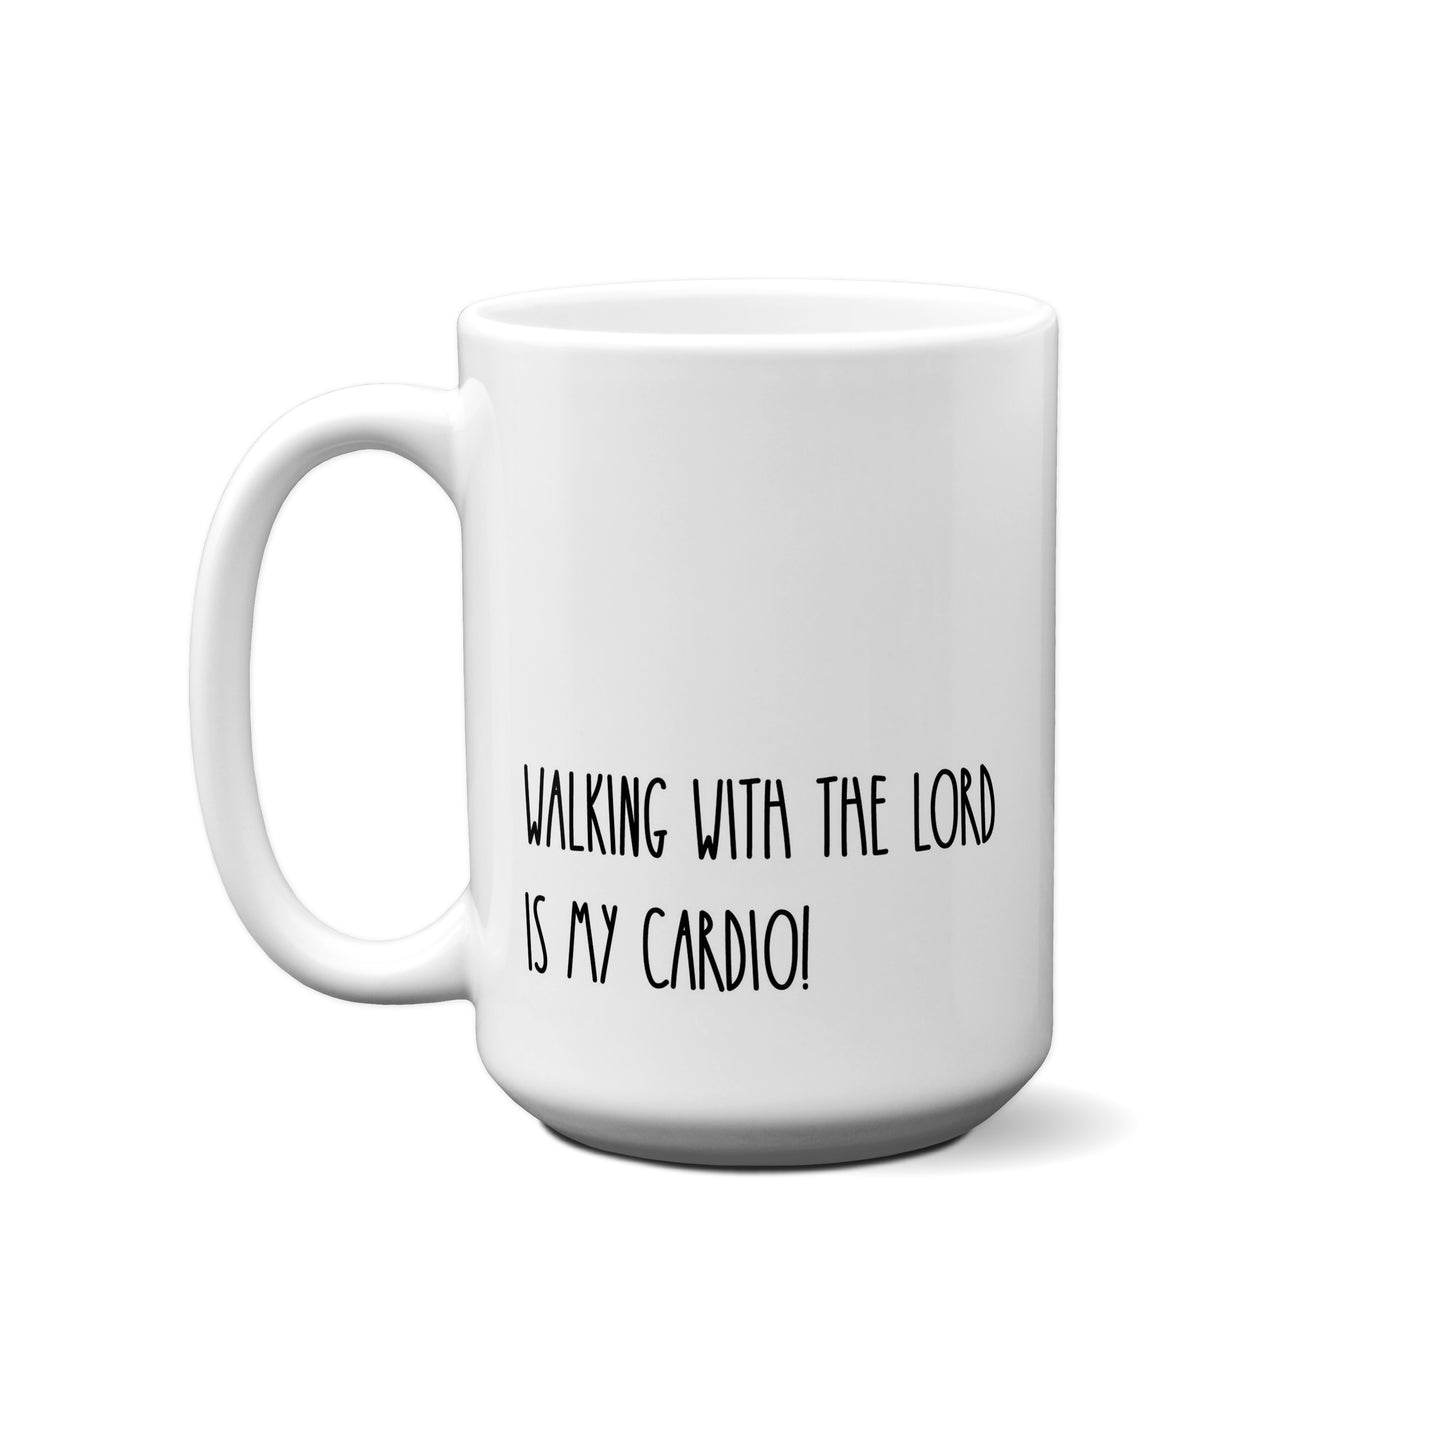 Walking With The Lord Is My Cardio! Quote Mug